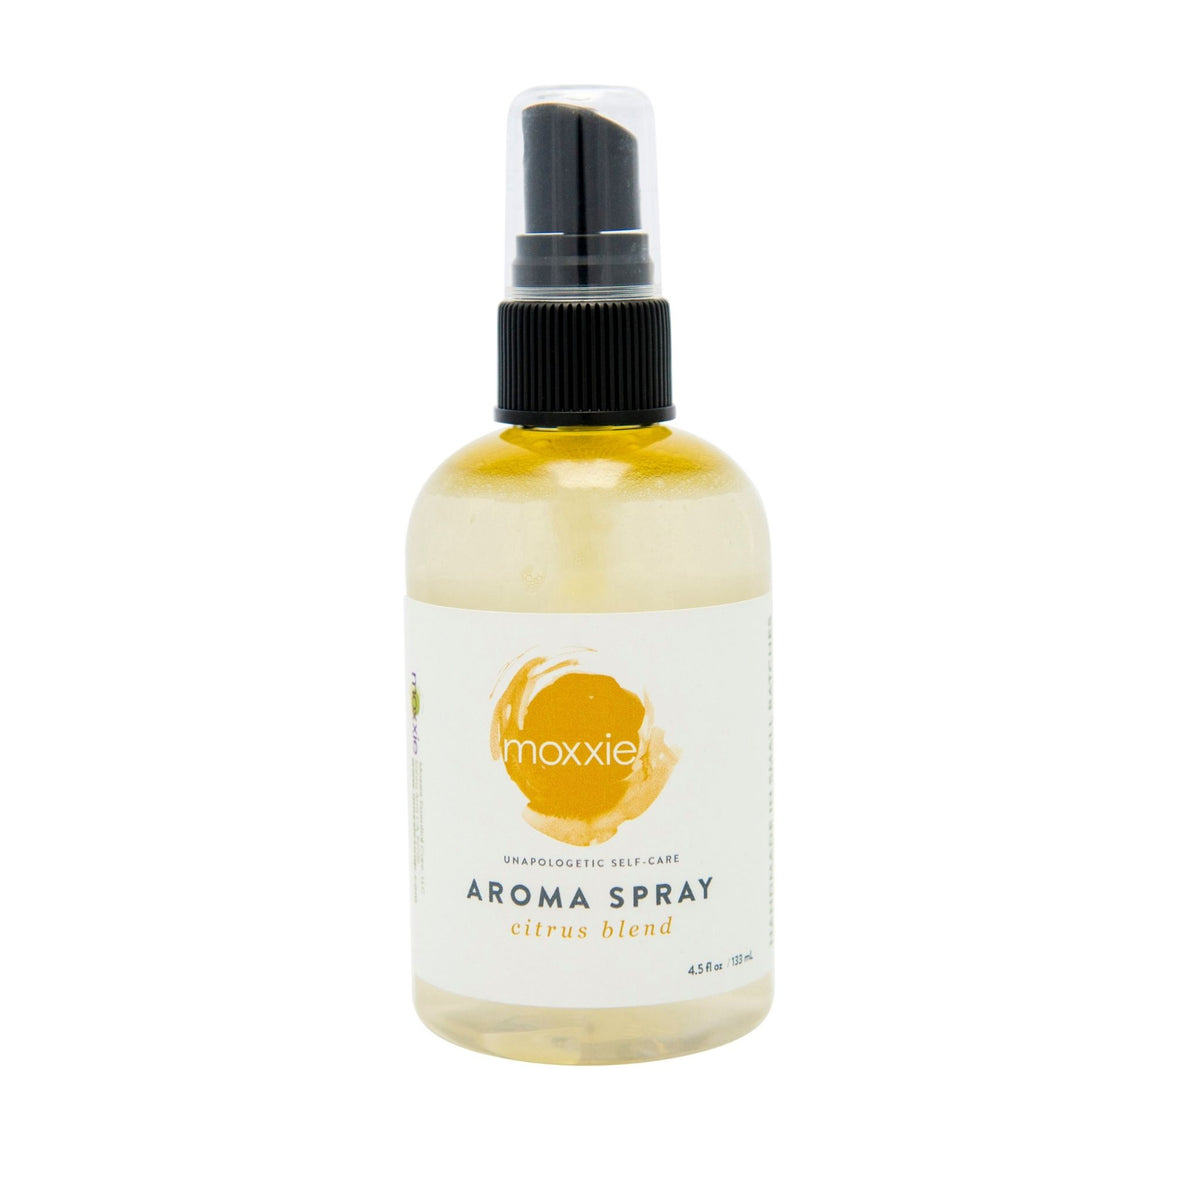 MOXXIE ESSENTIAL CARE BOTANICAL OIL AROMA SPRAY IN CITRUS BLEND SCENT